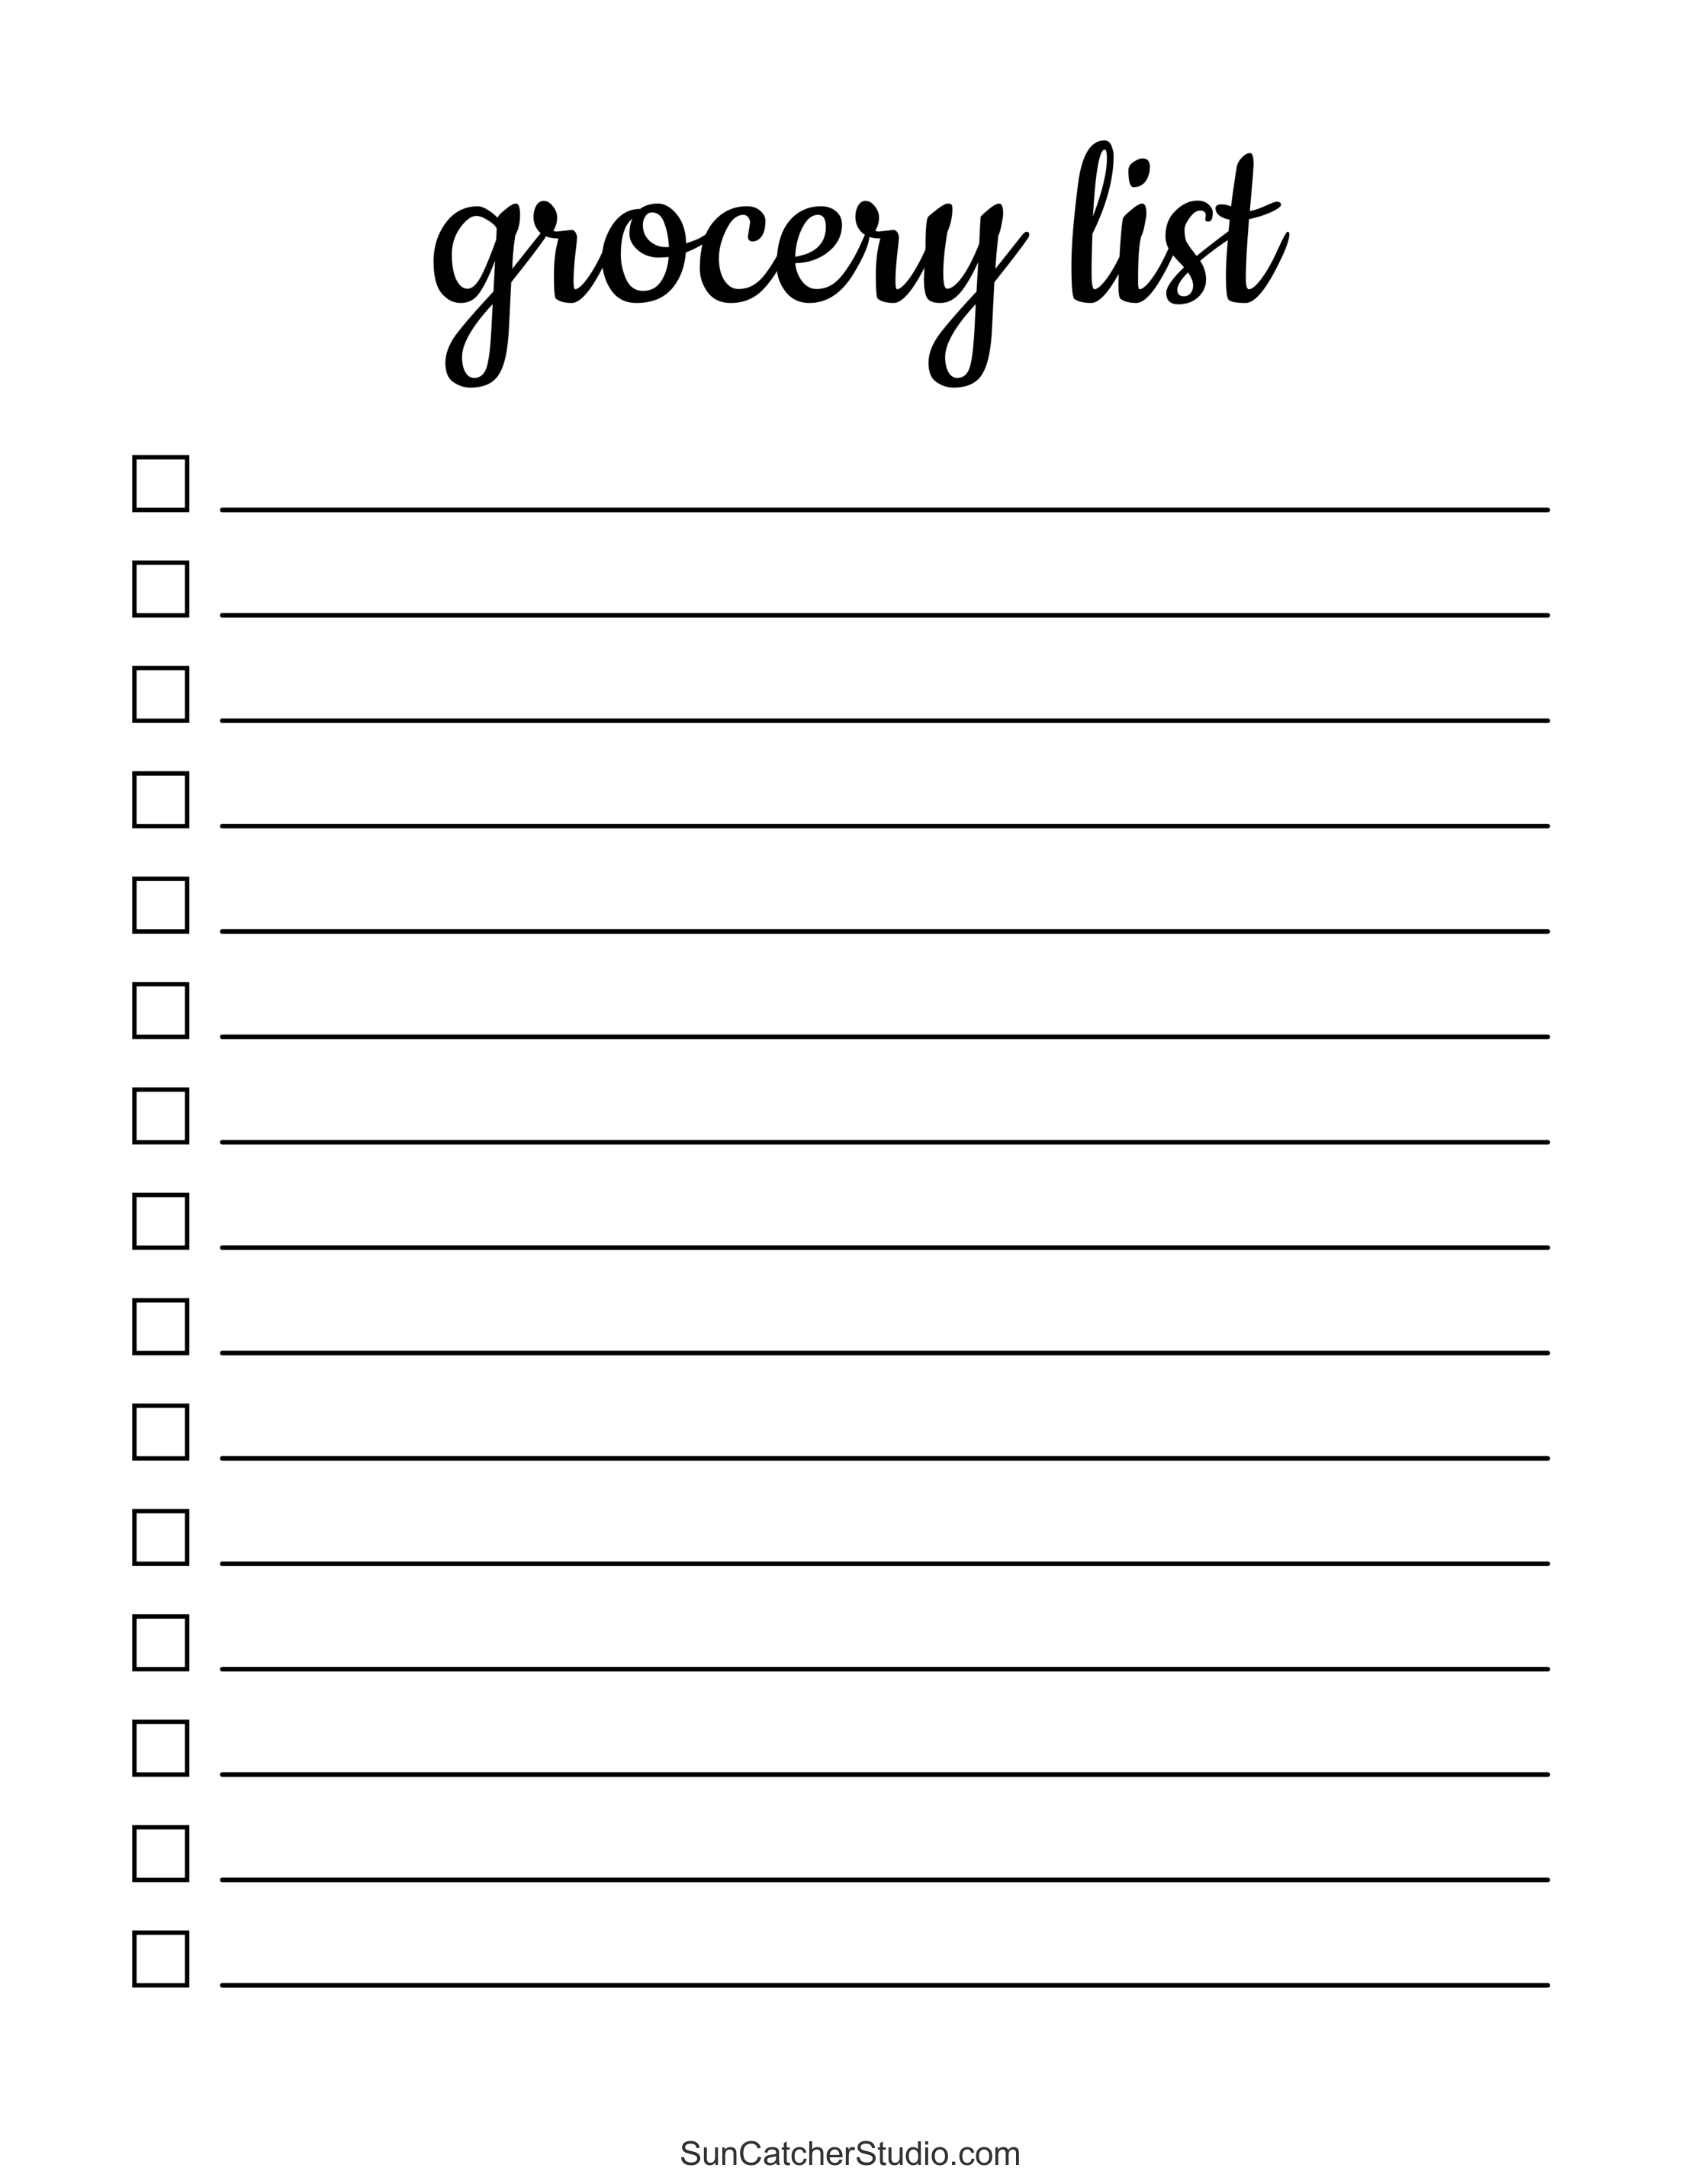 Free Printable Grocery List Templates (PDF): Shopping Lists – DIY Projects,  Patterns, Monograms, Designs, Templates